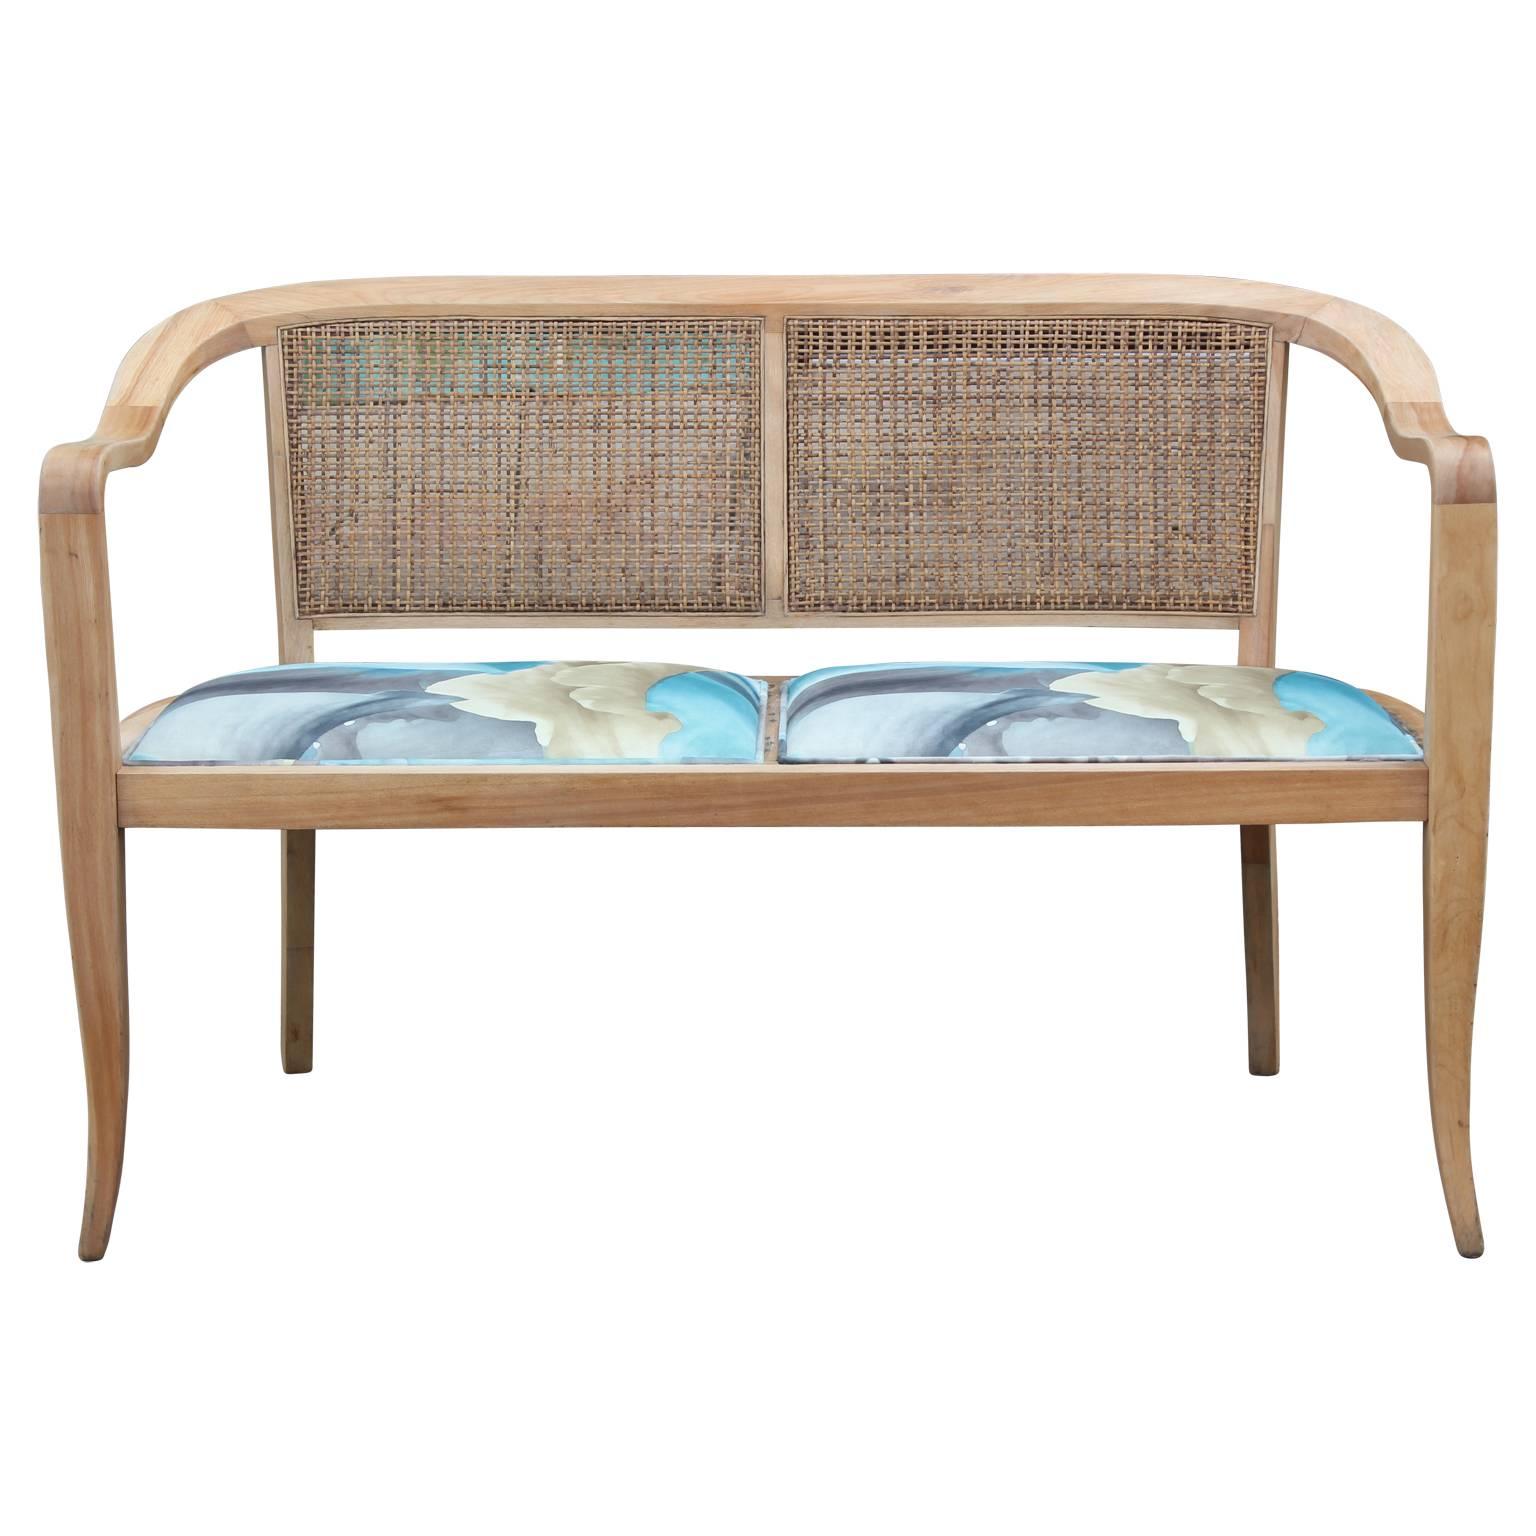 Gorgeous Edward Wormley style bench with bleached wood and cane back. Striped and Bleached wood finish with newly reupholstered cushions.